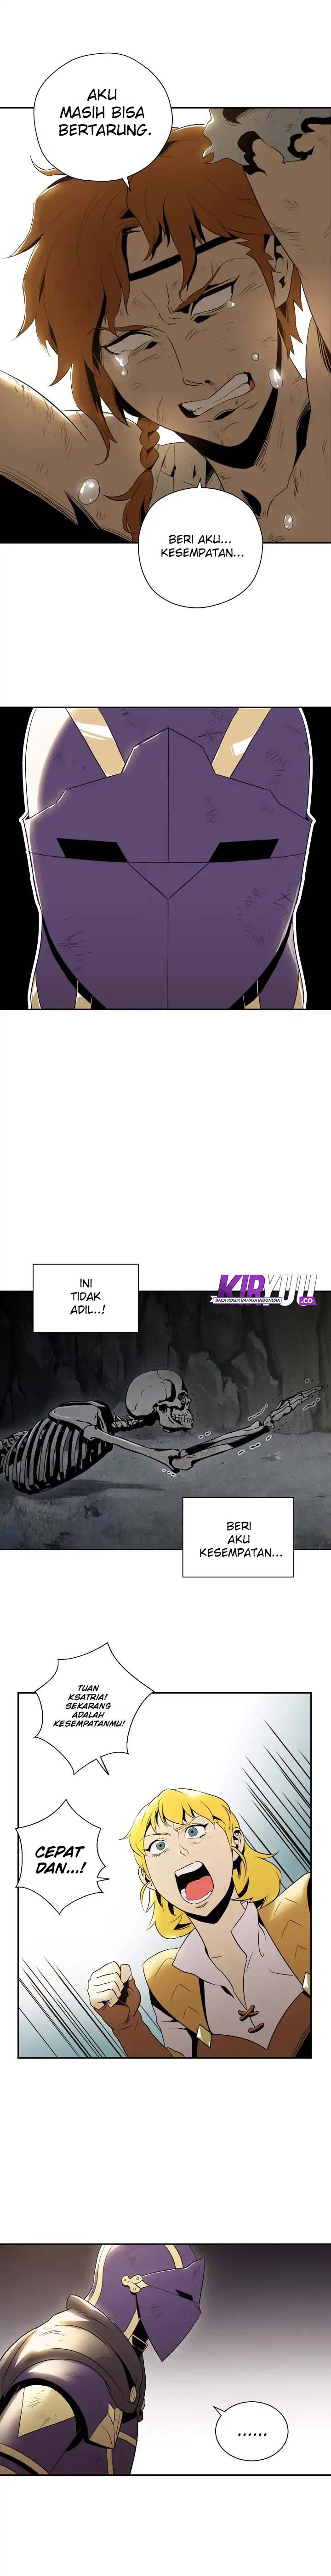 Skeleton Soldier Couldn’t Protect the Dungeon Chapter 32